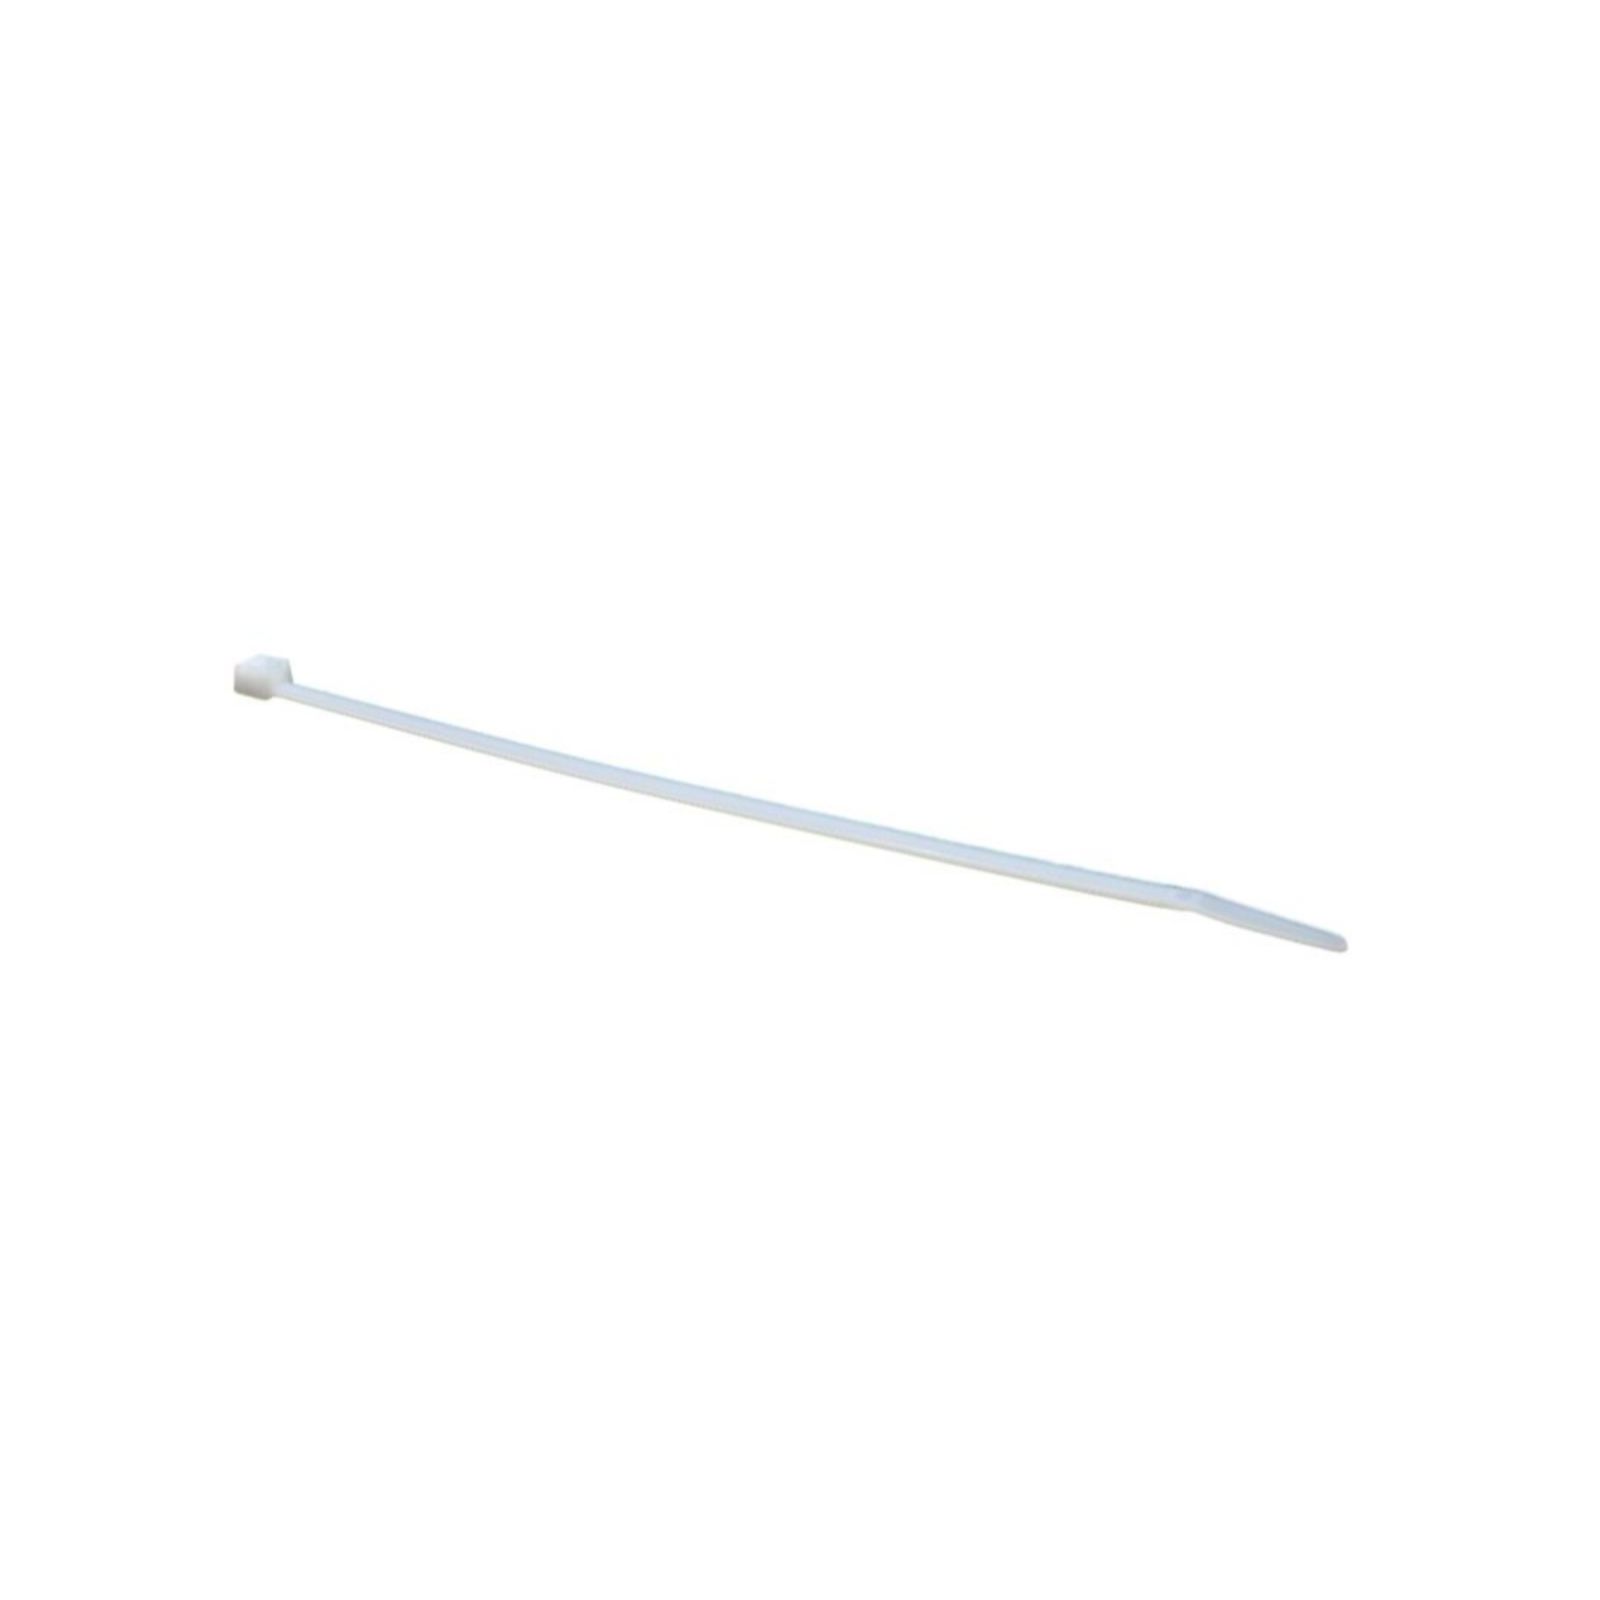 PROTECH 455067 - 7 1/2" Wire & Cable Ties - Nylon Natural, Bag of 100